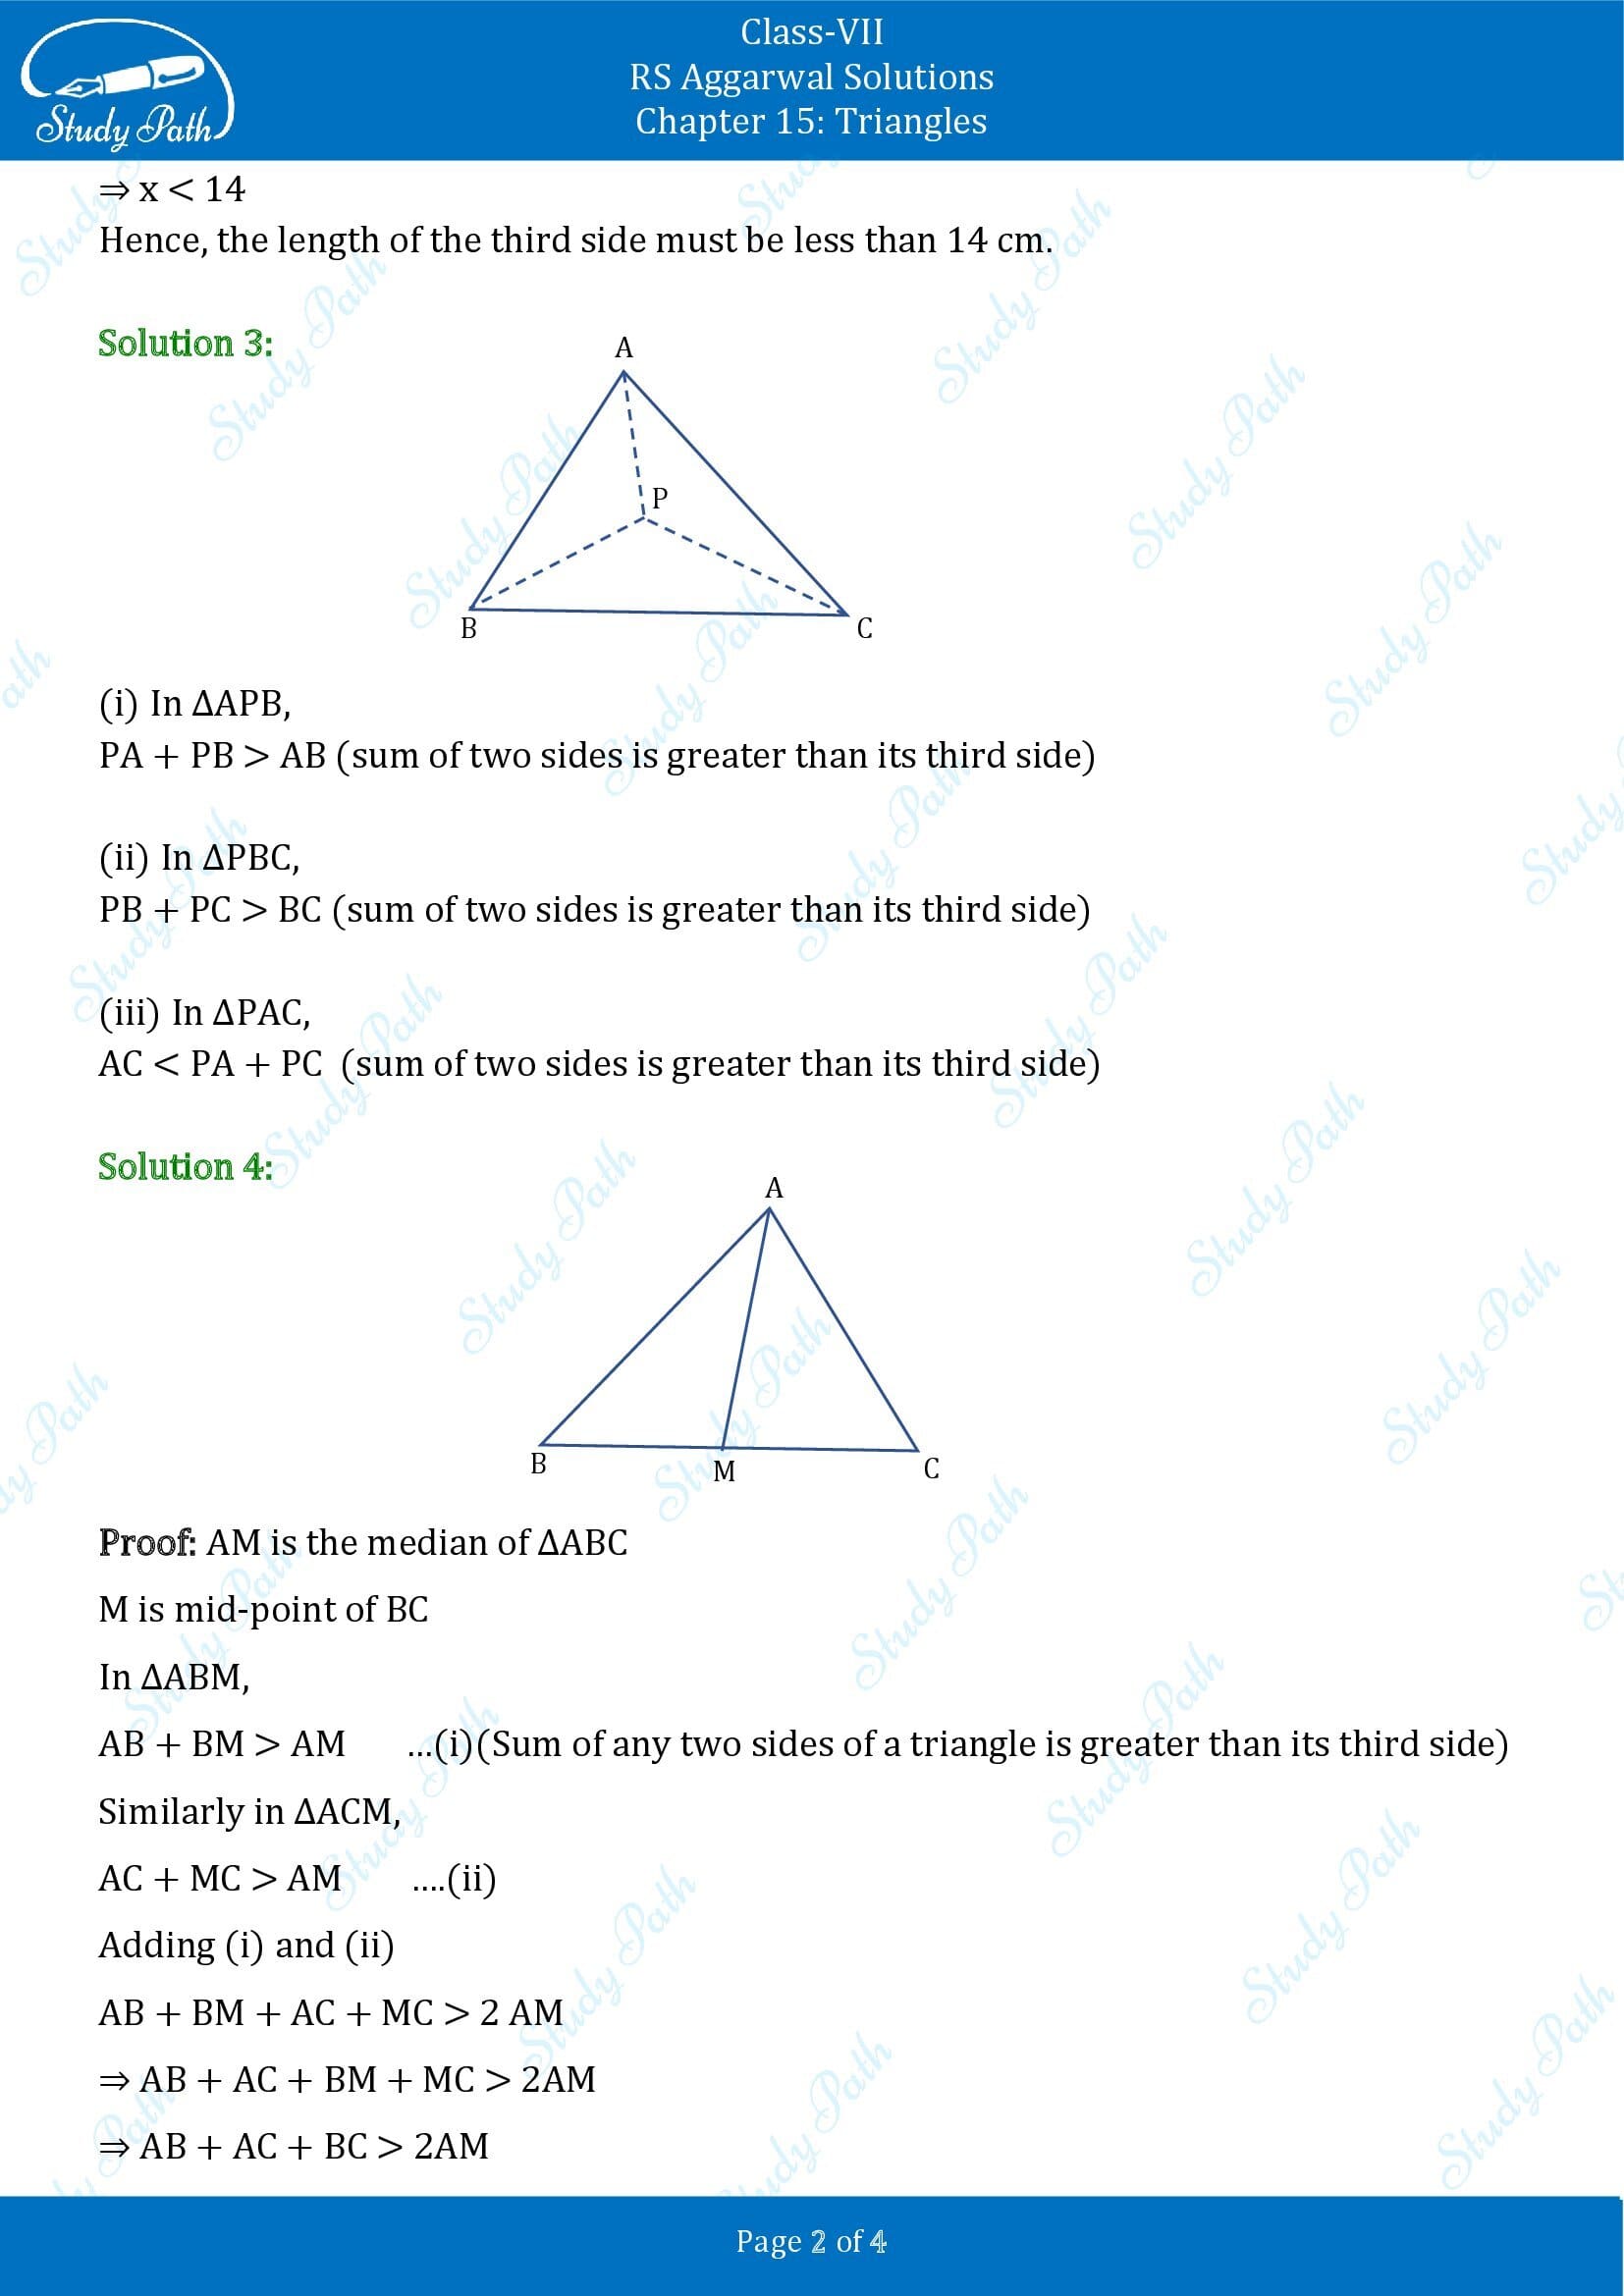 RS Aggarwal Solutions Class 7 Chapter 15 Triangles Exercise 15C 00002